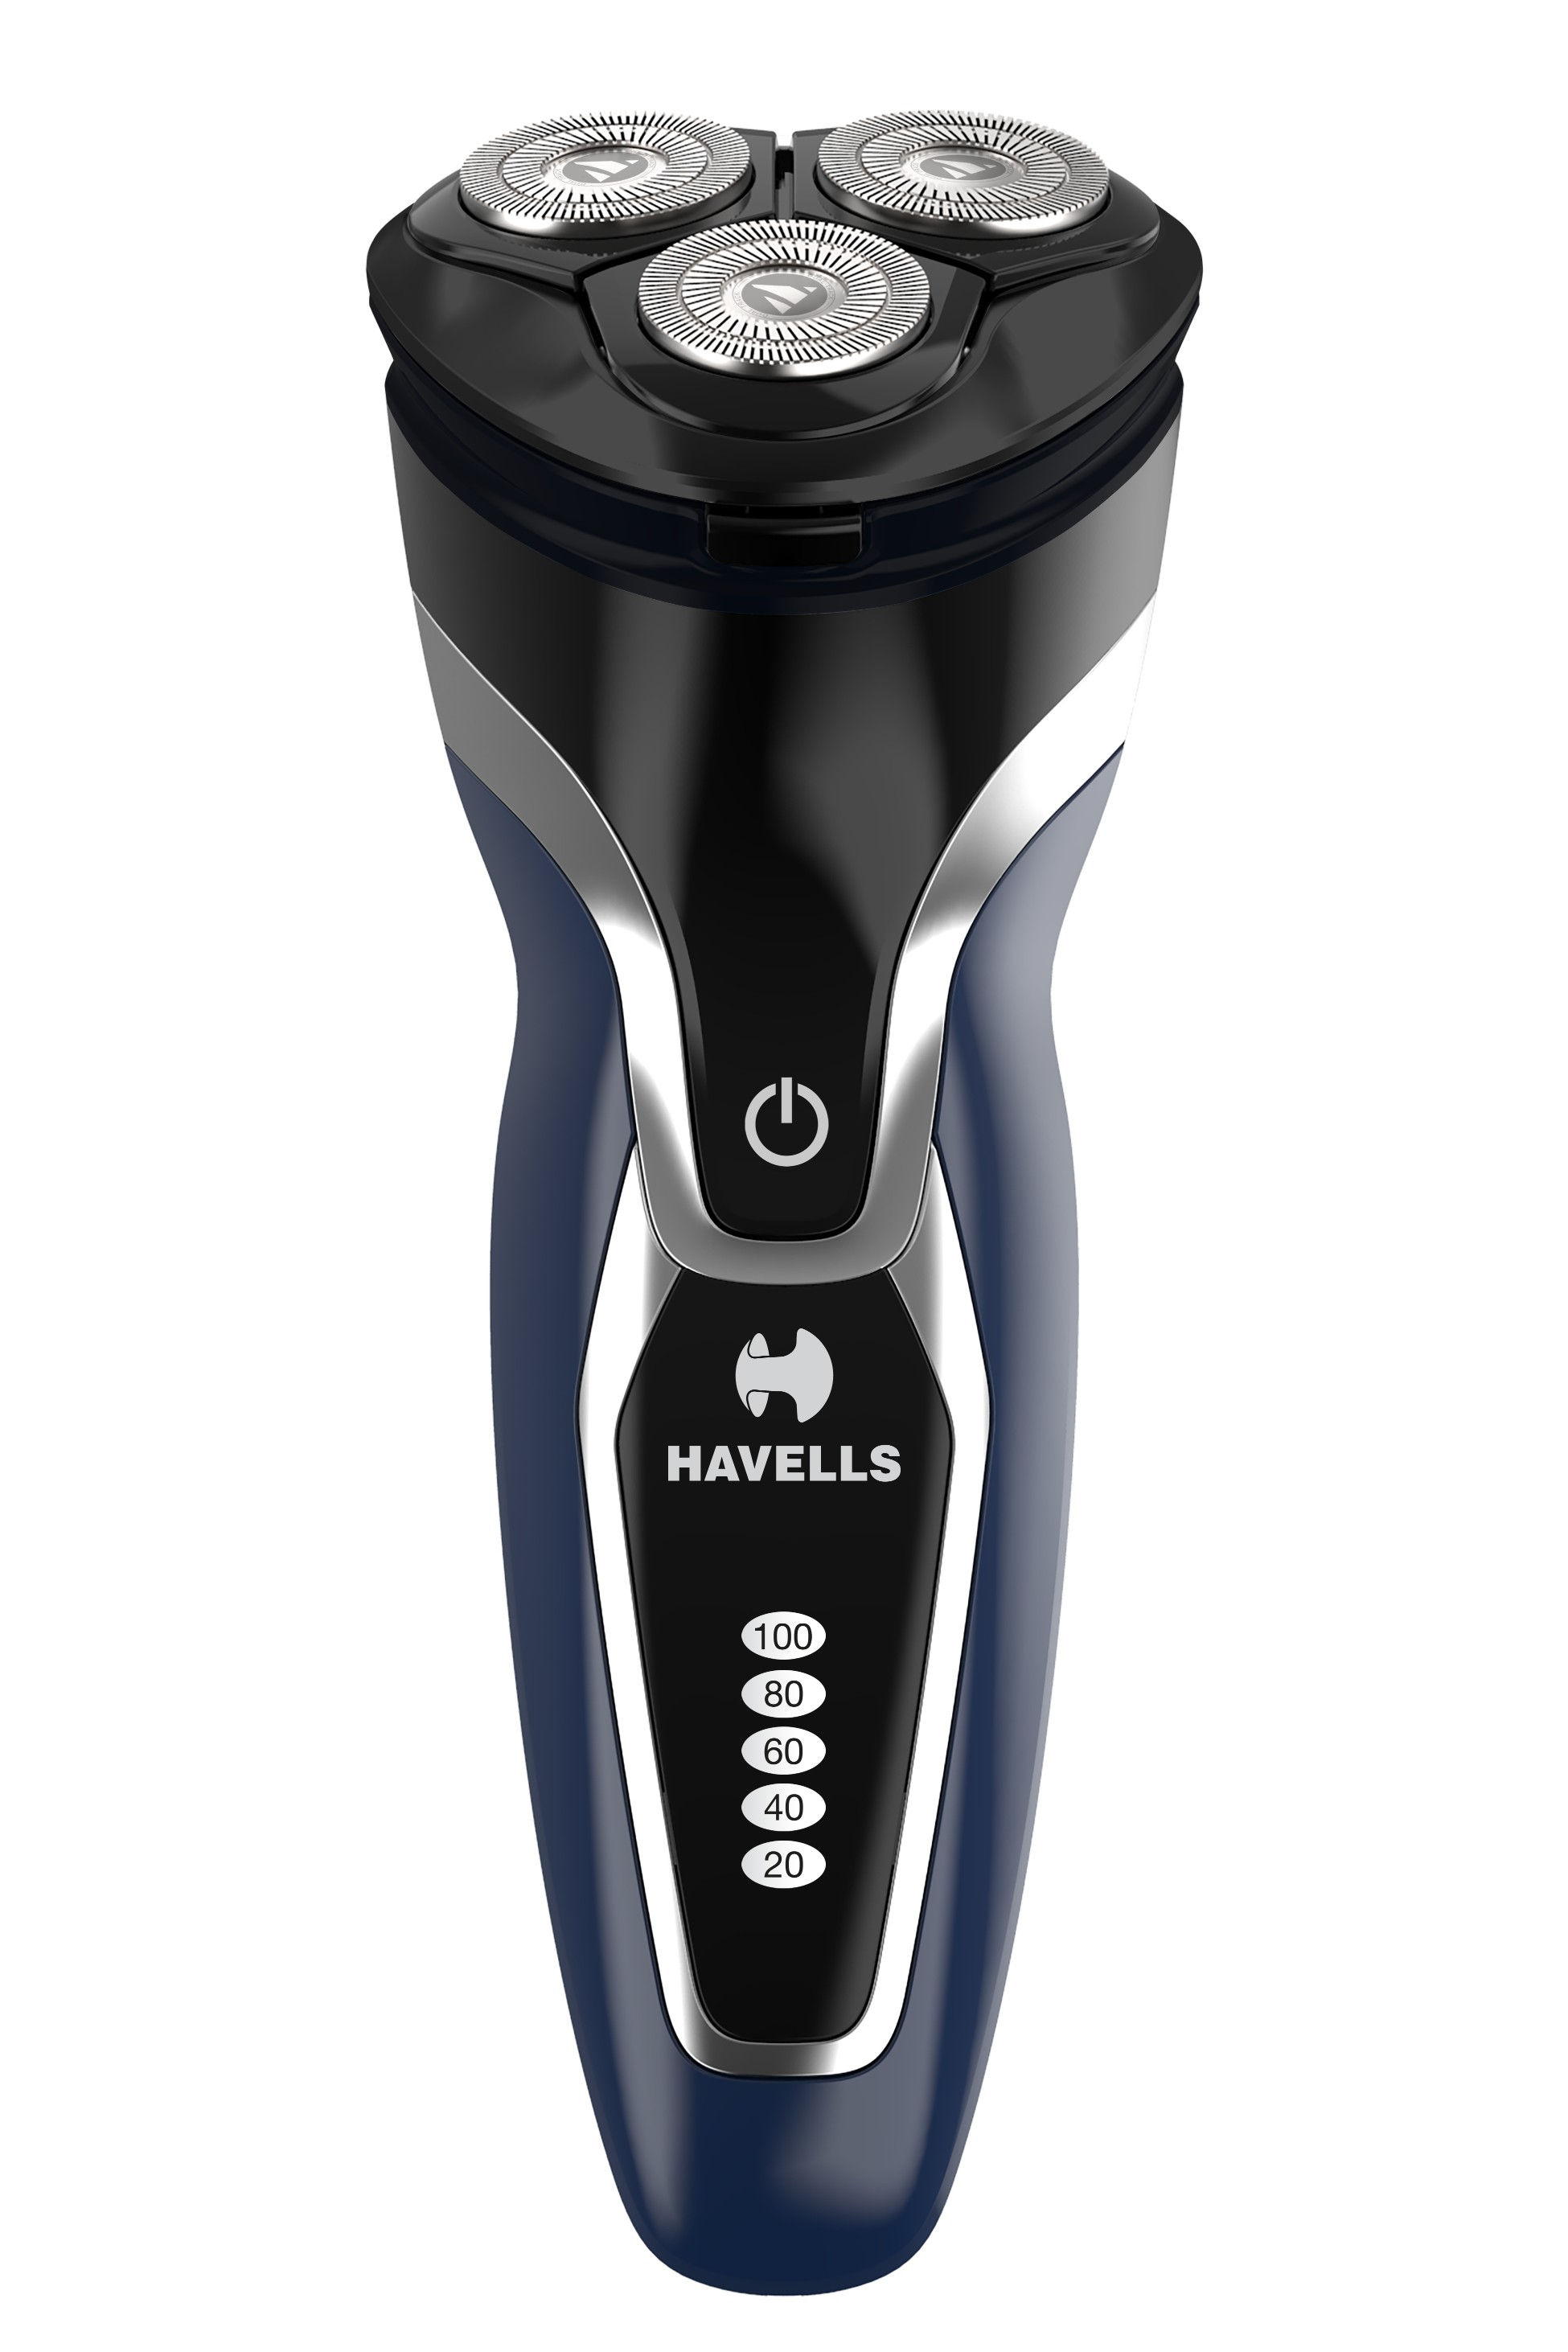 Havells RS7130 Electric Shaver (Blue)